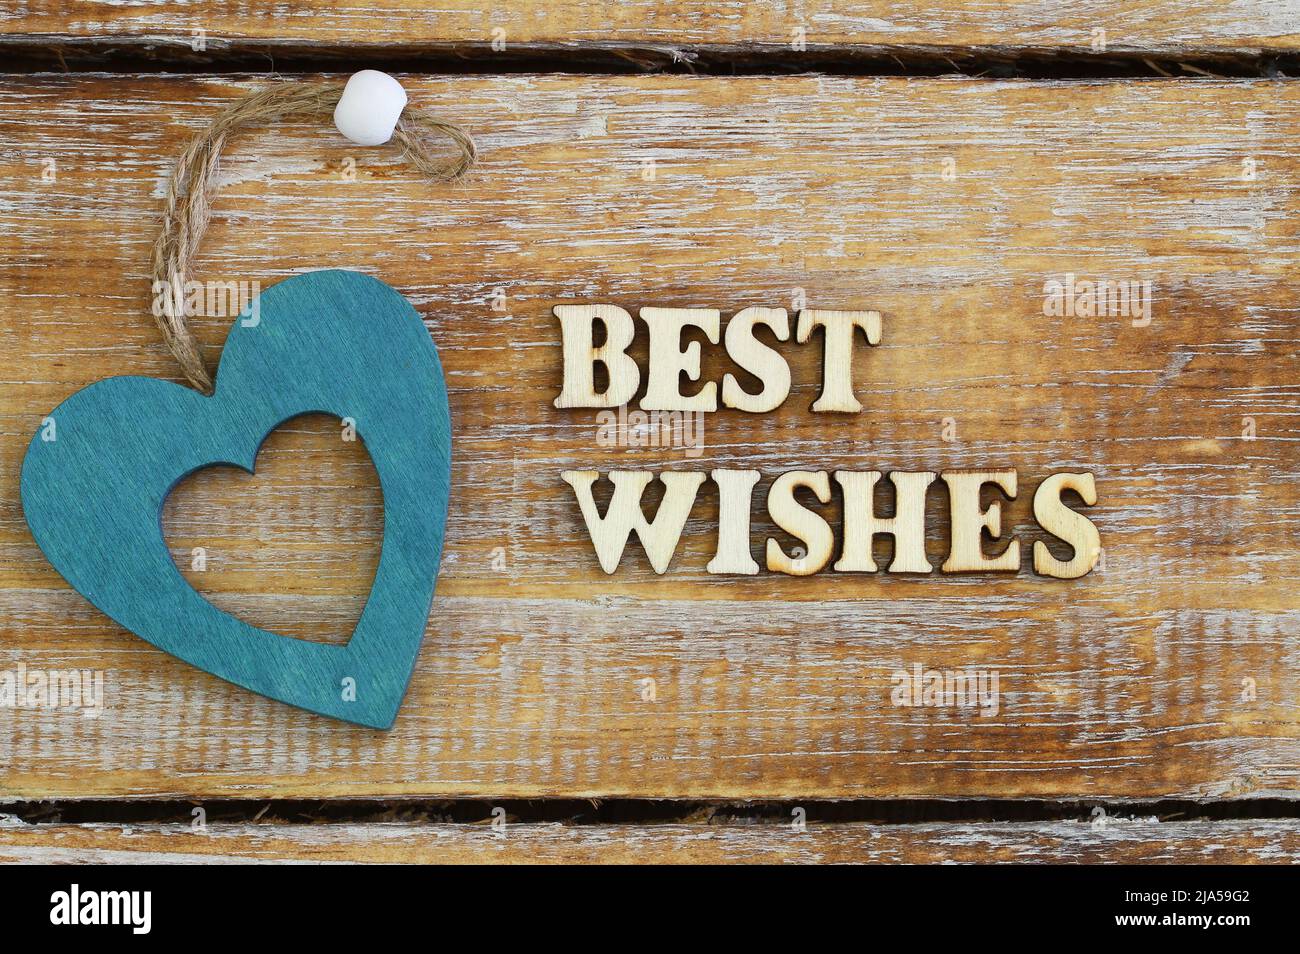 Best wishes written with wooden letters on rustic surface and a wooden heart Stock Photo